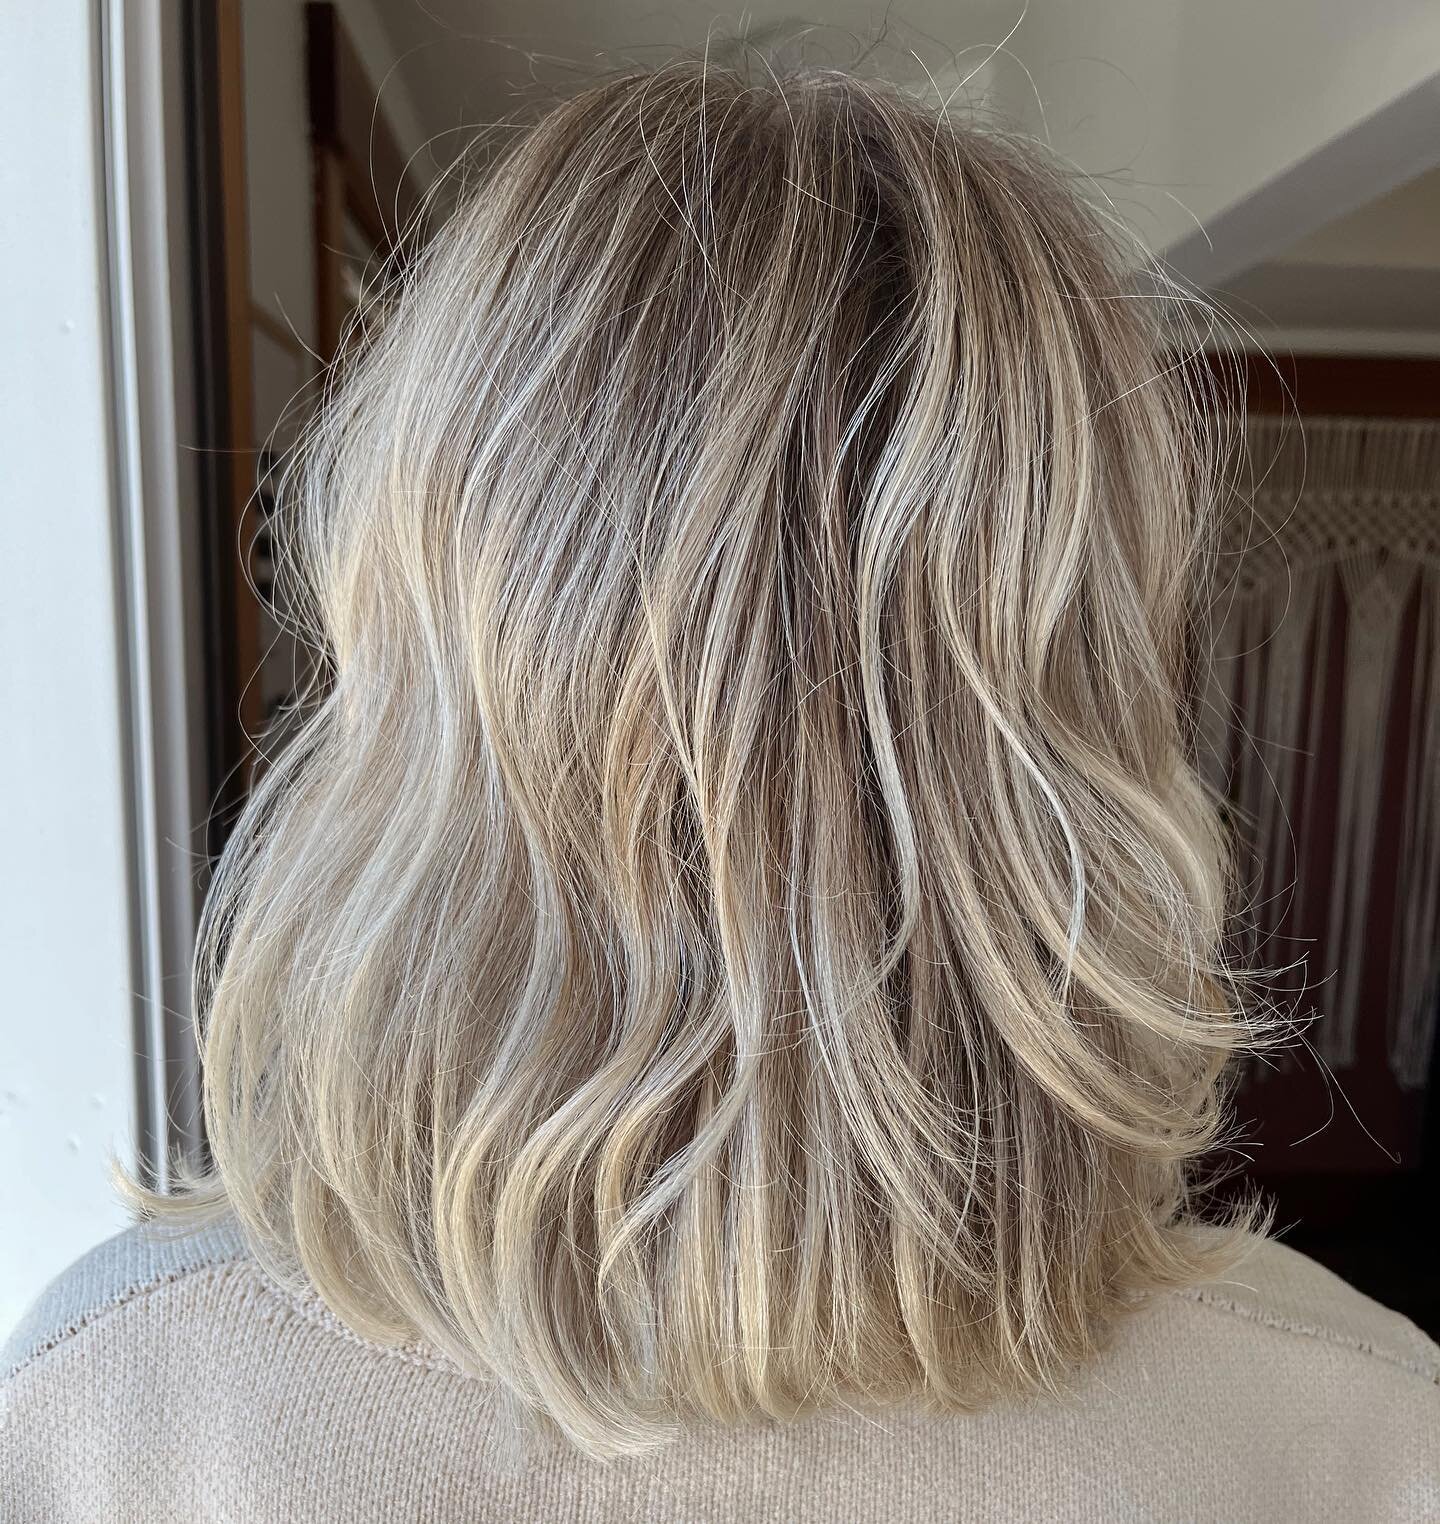 Keep. It. Bright. LEAVE. THAT. DEPTH. 👏🏾 @jennifergracecreative hadn&rsquo;t had her hair highlighted for 8 months, and wanted to look bright blonde again. We left her beautiful natural base as her low light, and just added some lived in highlights